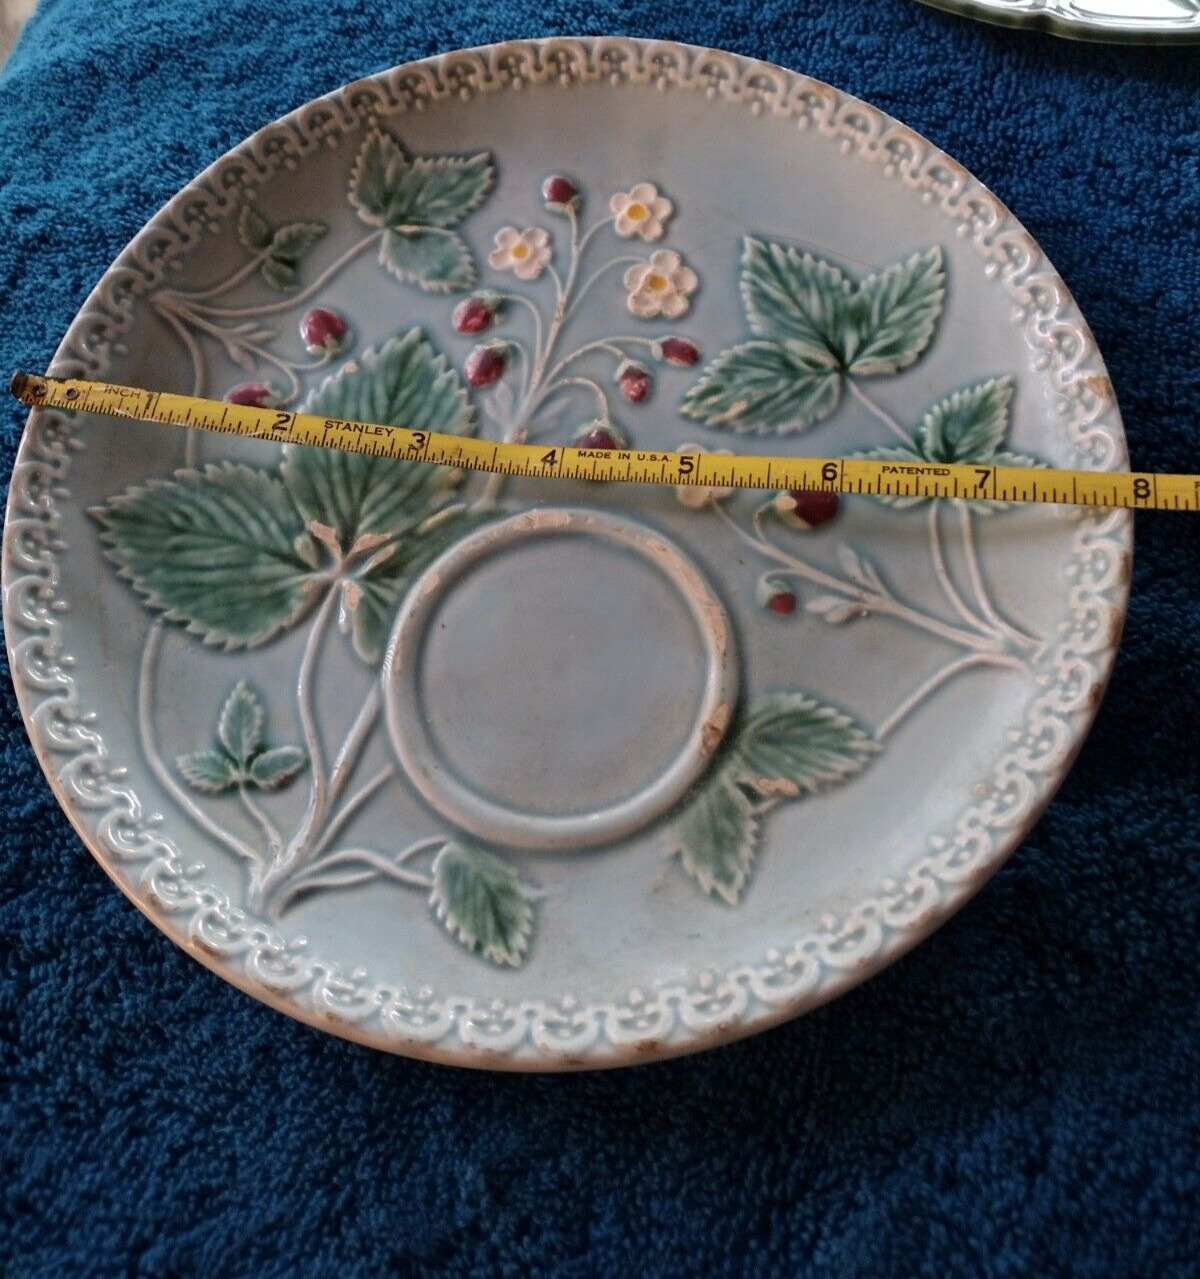 Vintage floral West Germany plate. Possibly Majolica?